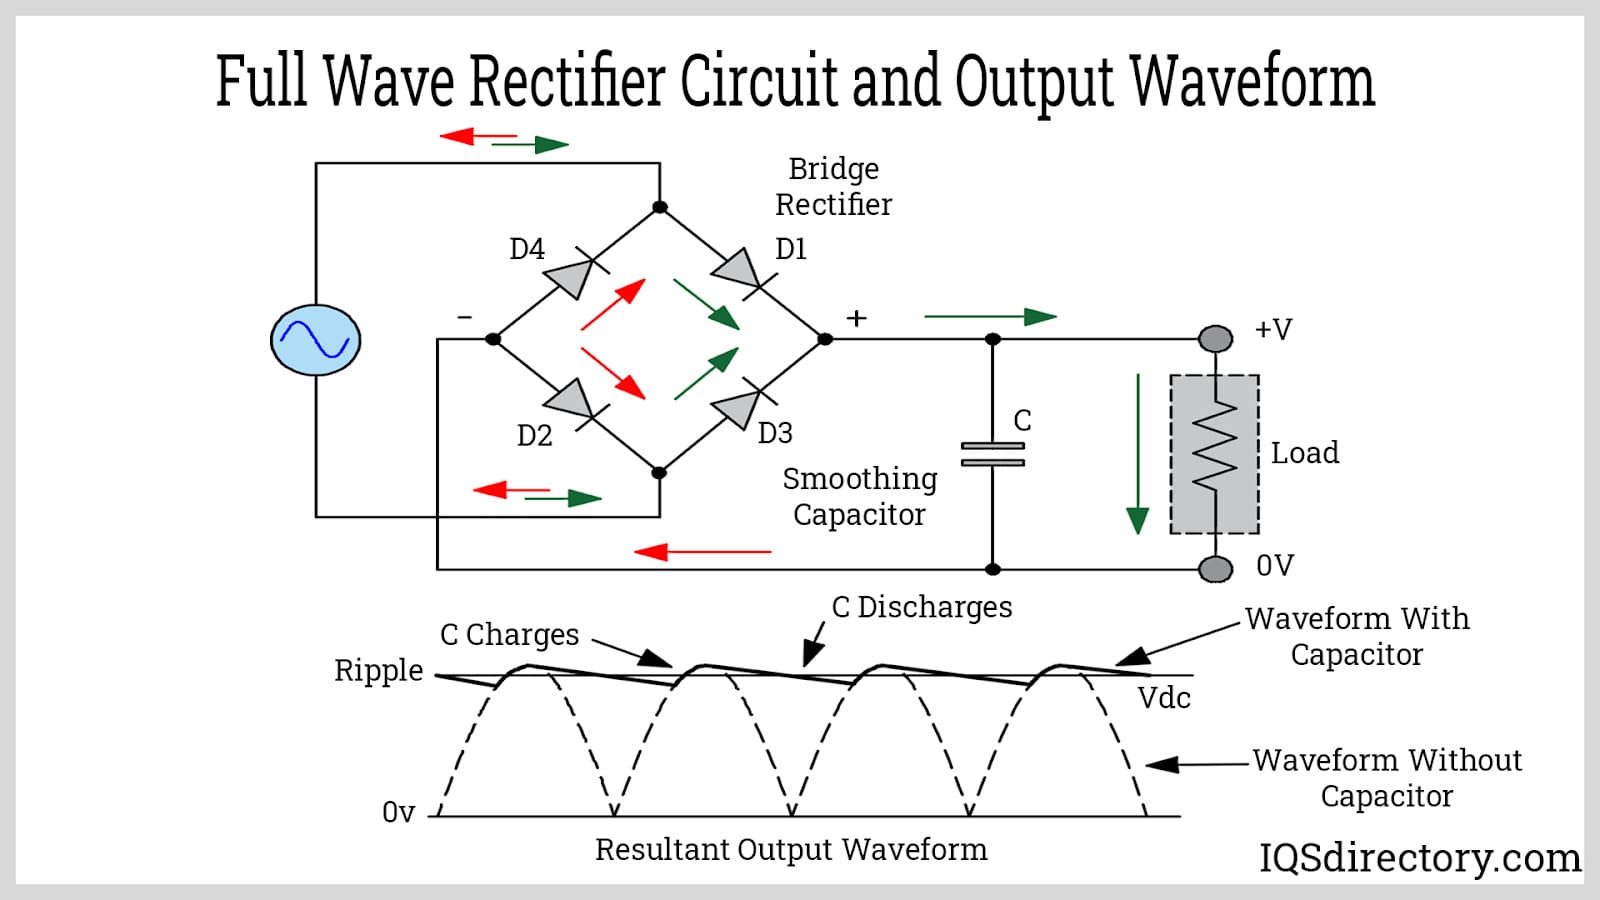 Full Wave Rectifier Circuit and Output Waveform